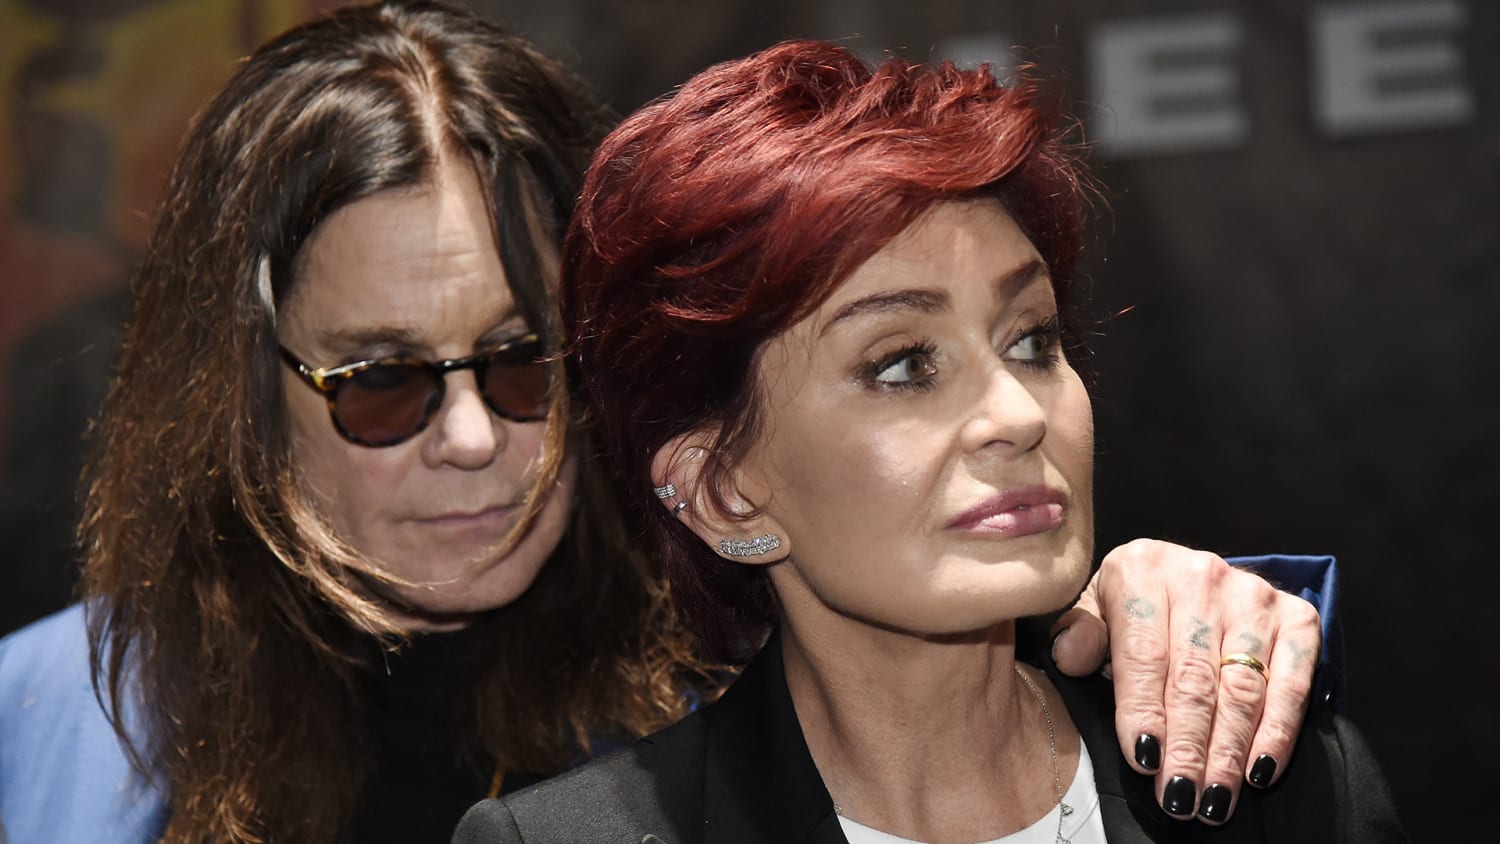 Sharon Osbourne confirms she and Ozzy are 'back on' as a couple